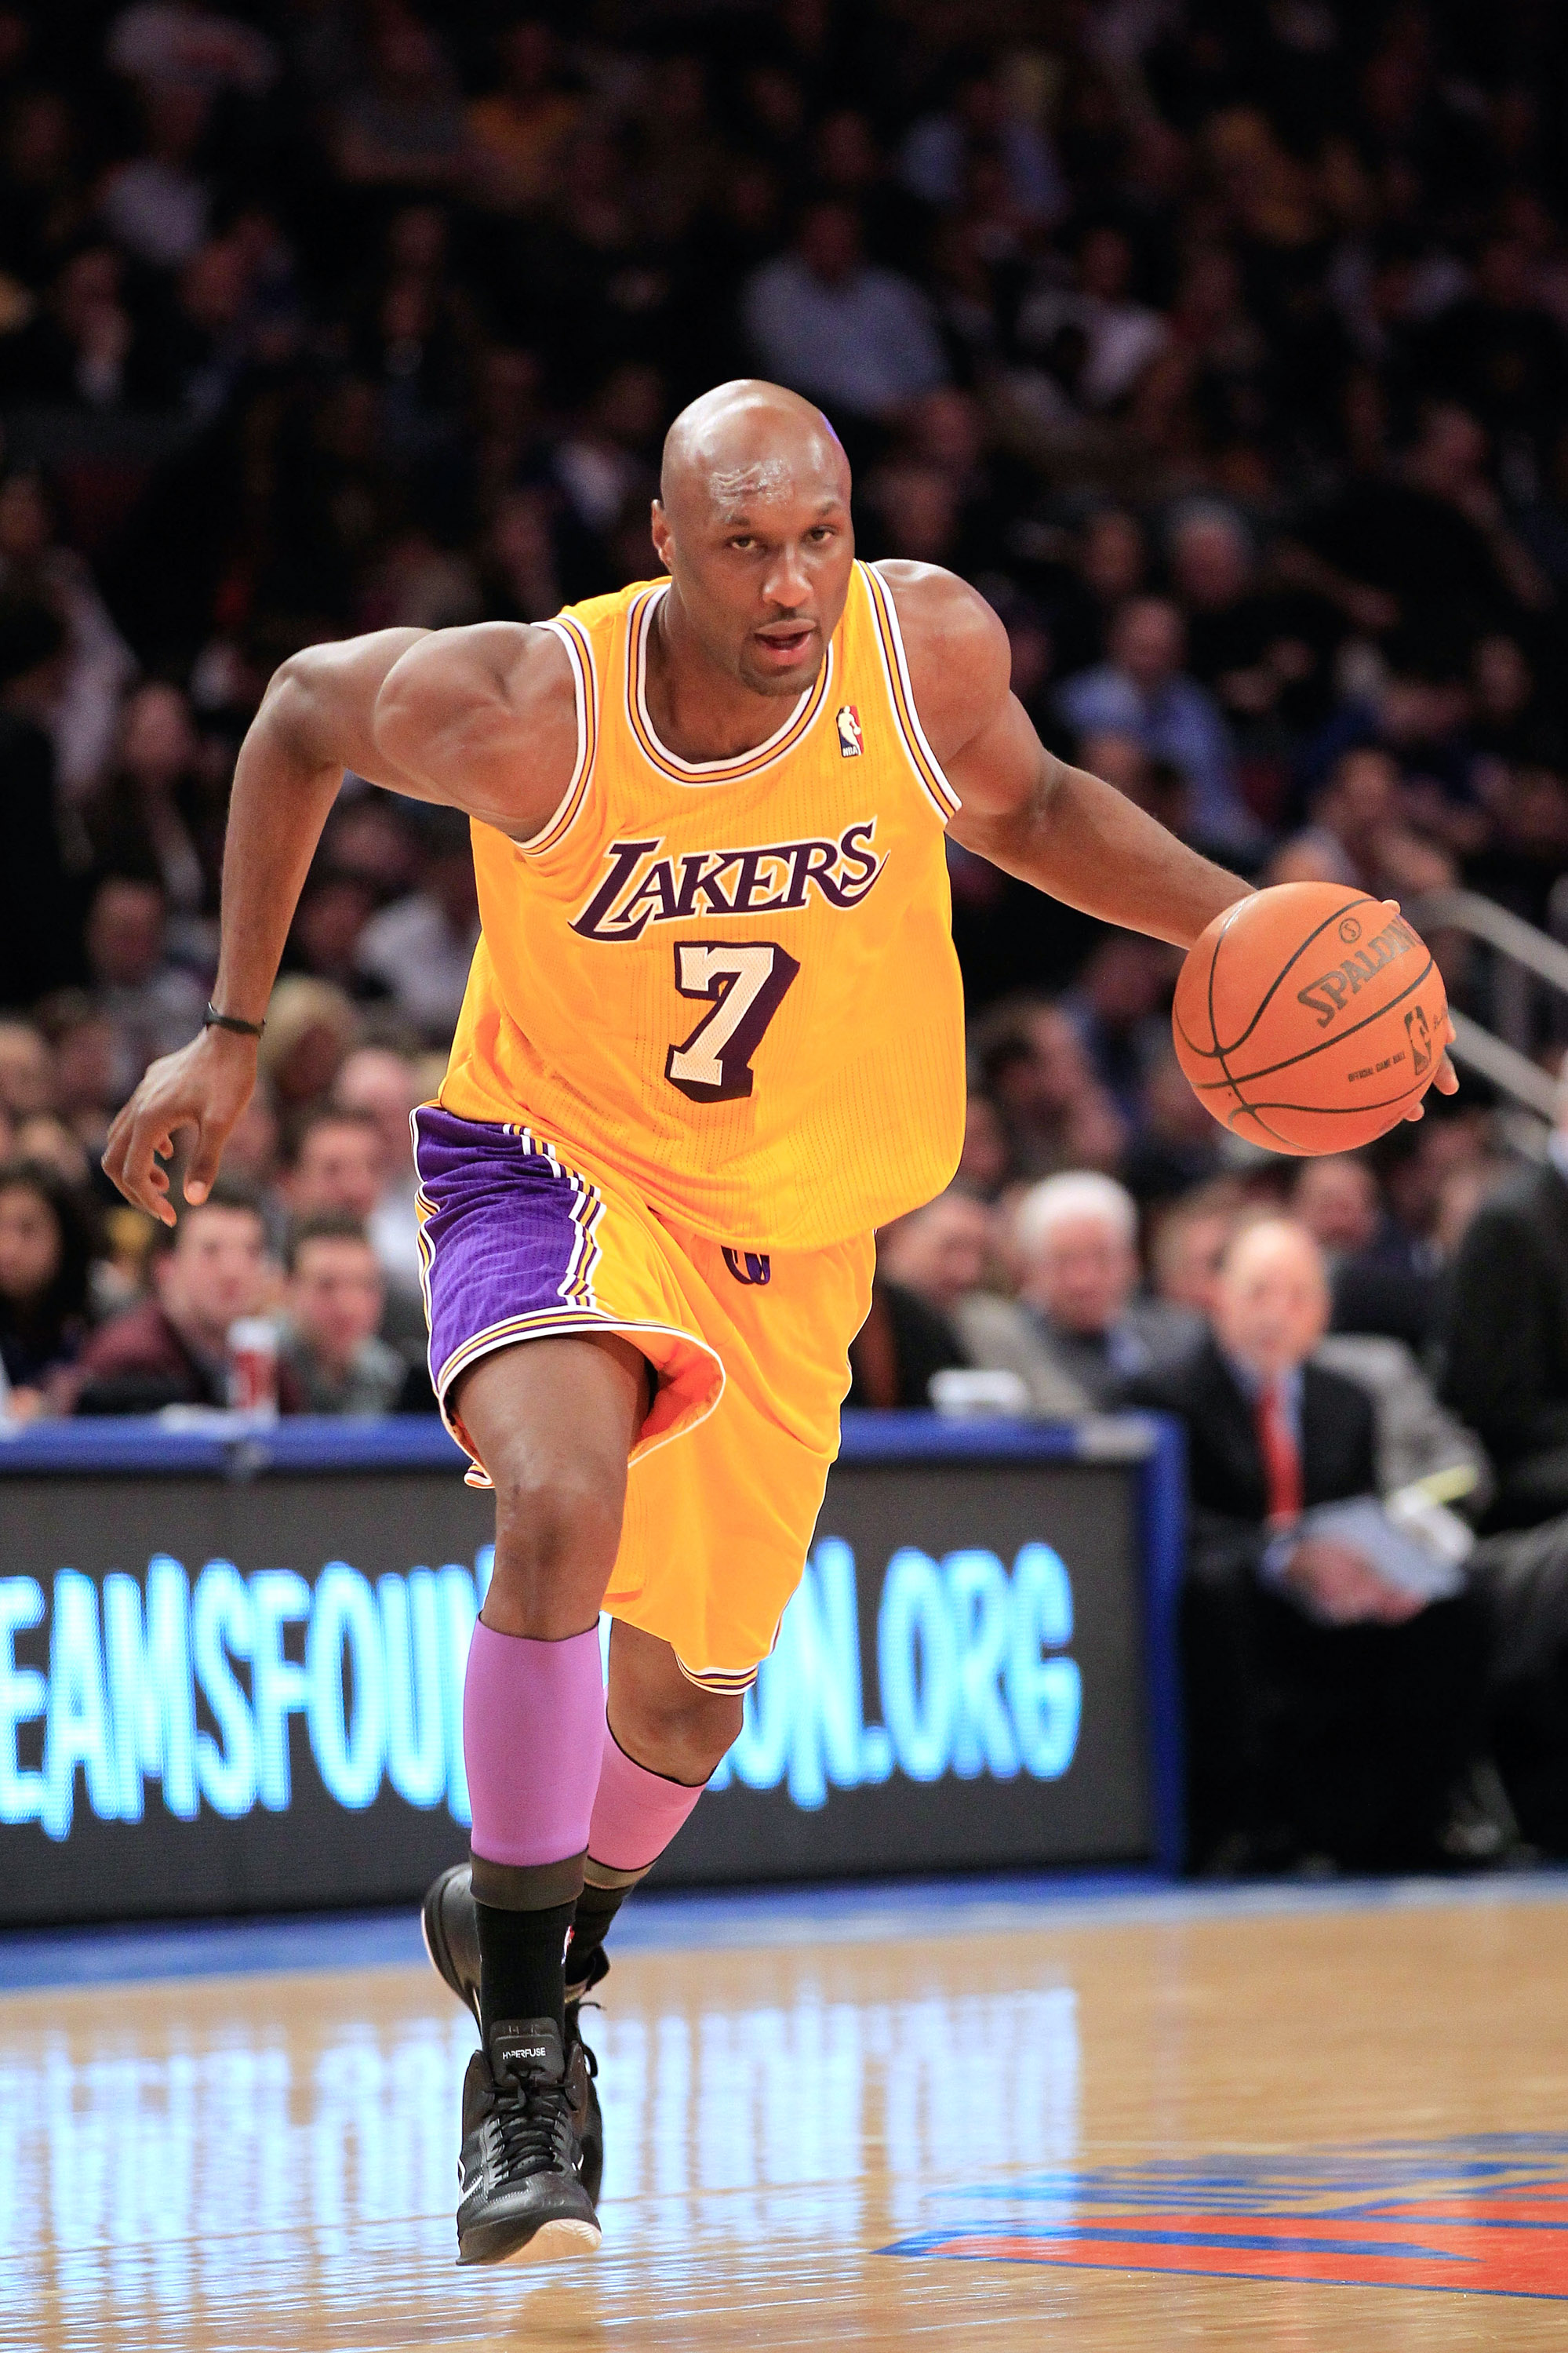 NEW YORK, NY - FEBRUARY 11: Lamar Odum #7 of the Los Angeles Lakers dribbles against the New York Knicks at Madison Square Garden on February 11, 2011 in New York City. NOTE TO USER: User expressly acknowledges and agrees that, by downloading and/or using